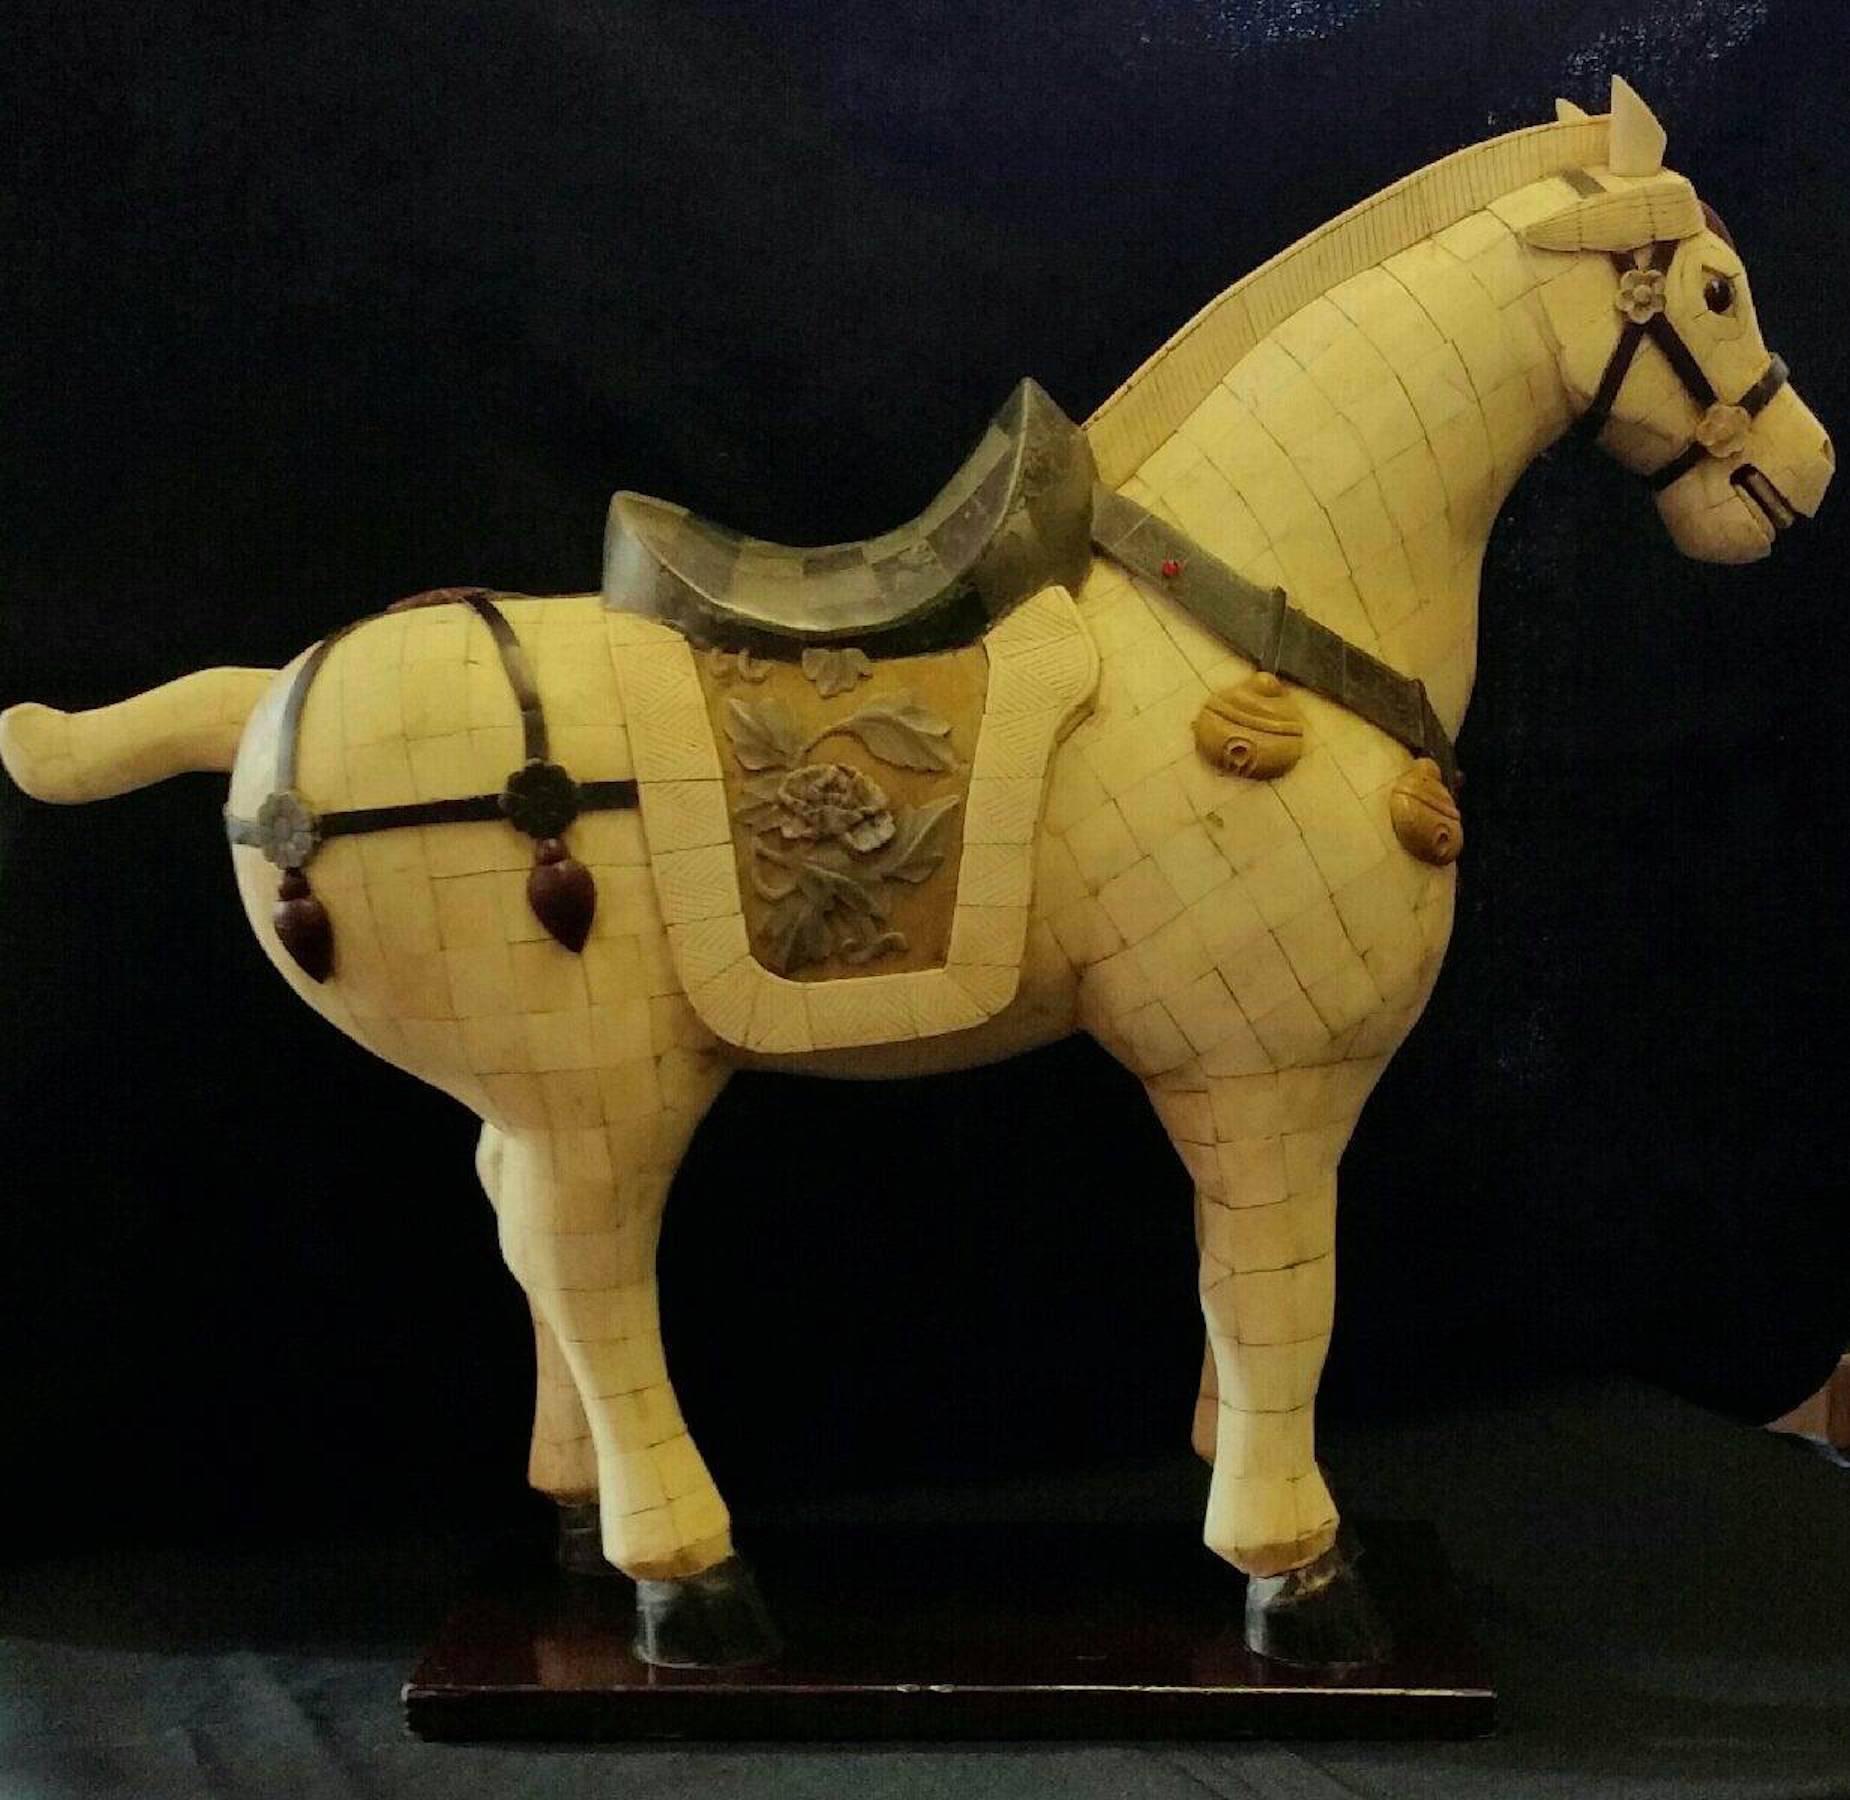 Majestic Chinese Tang horse

Large-scale handcrafted bone veneer Tang horse, jeweled with an array of beautifully carved hard stone and fine jadeite. Mounted on a lacquered wooden base.

Chinese, circa 1960s

Measure: lacquer base 17